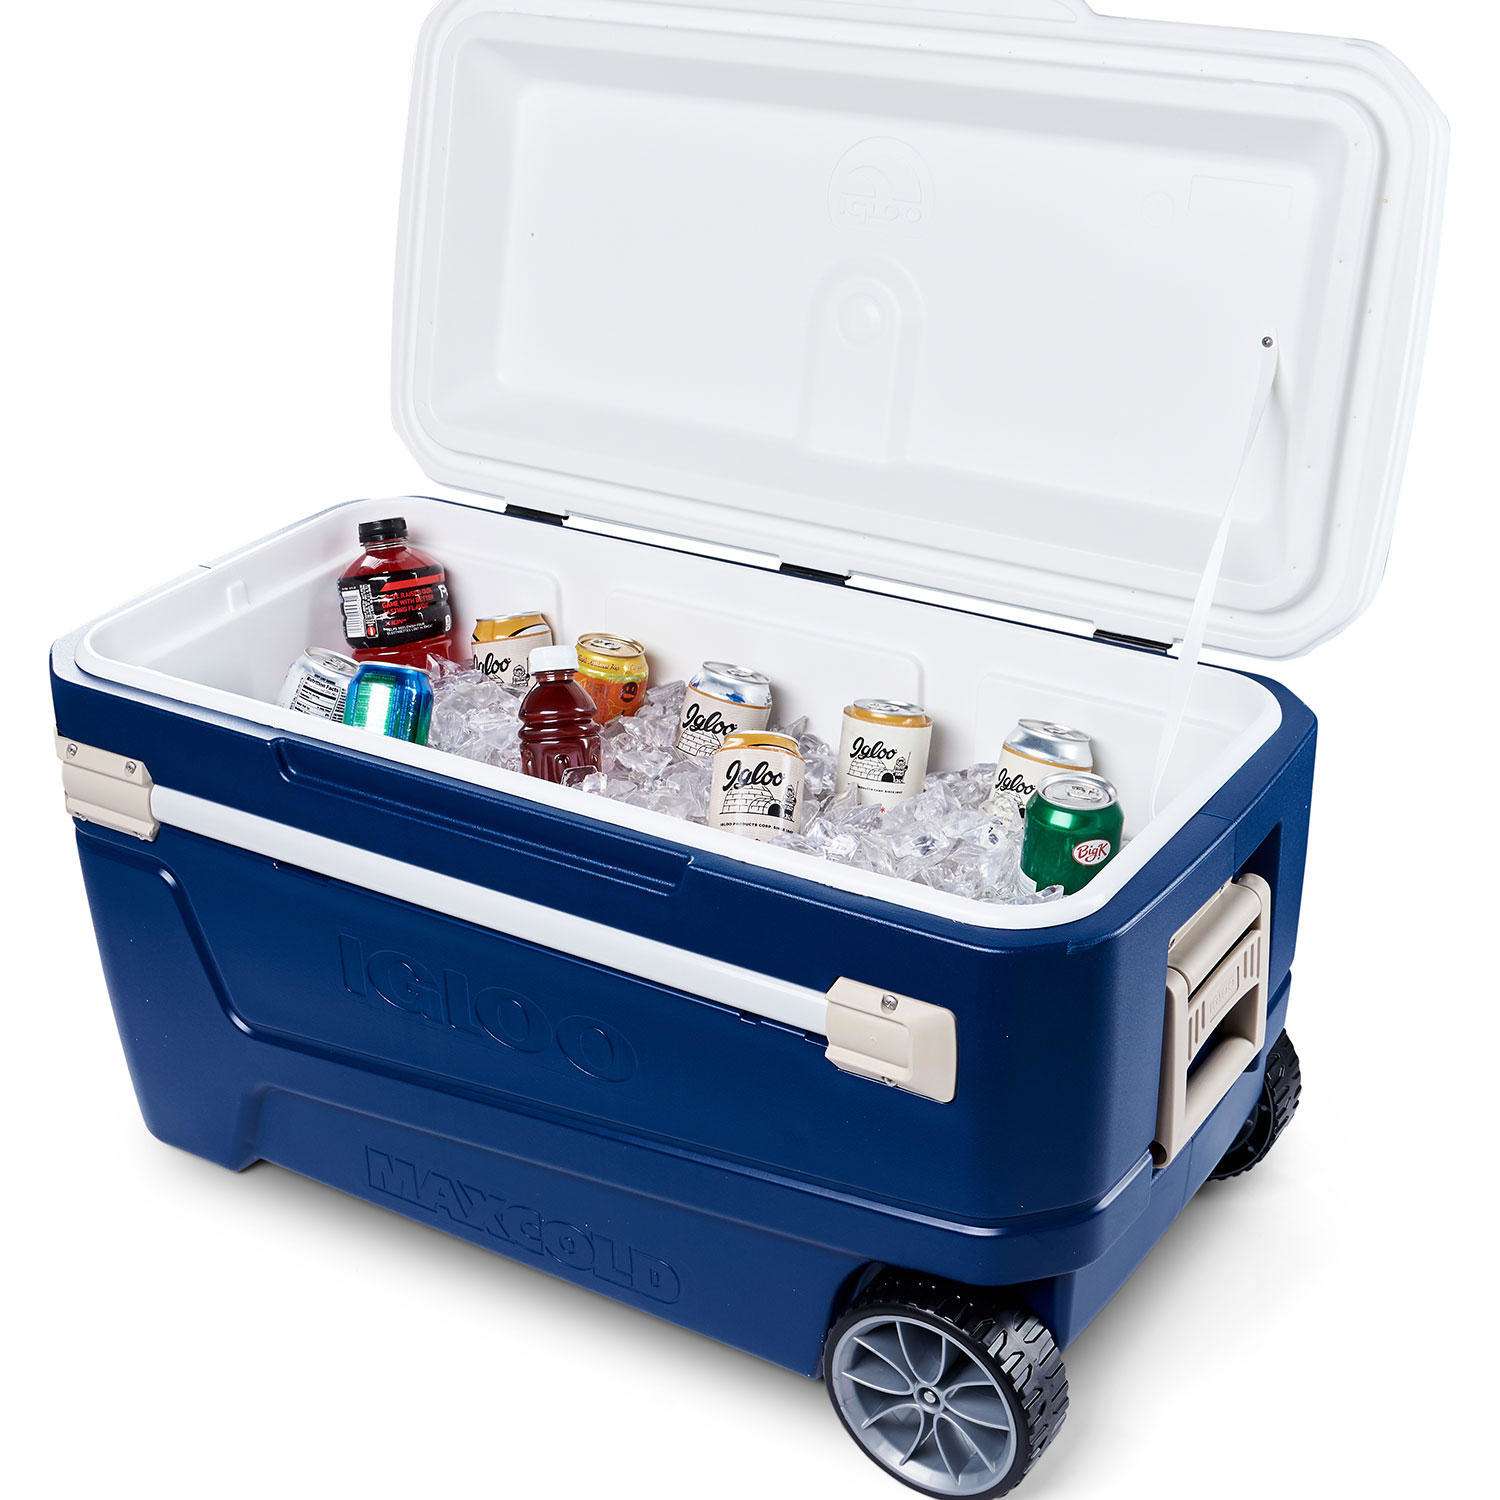 the cooler with drinks inside